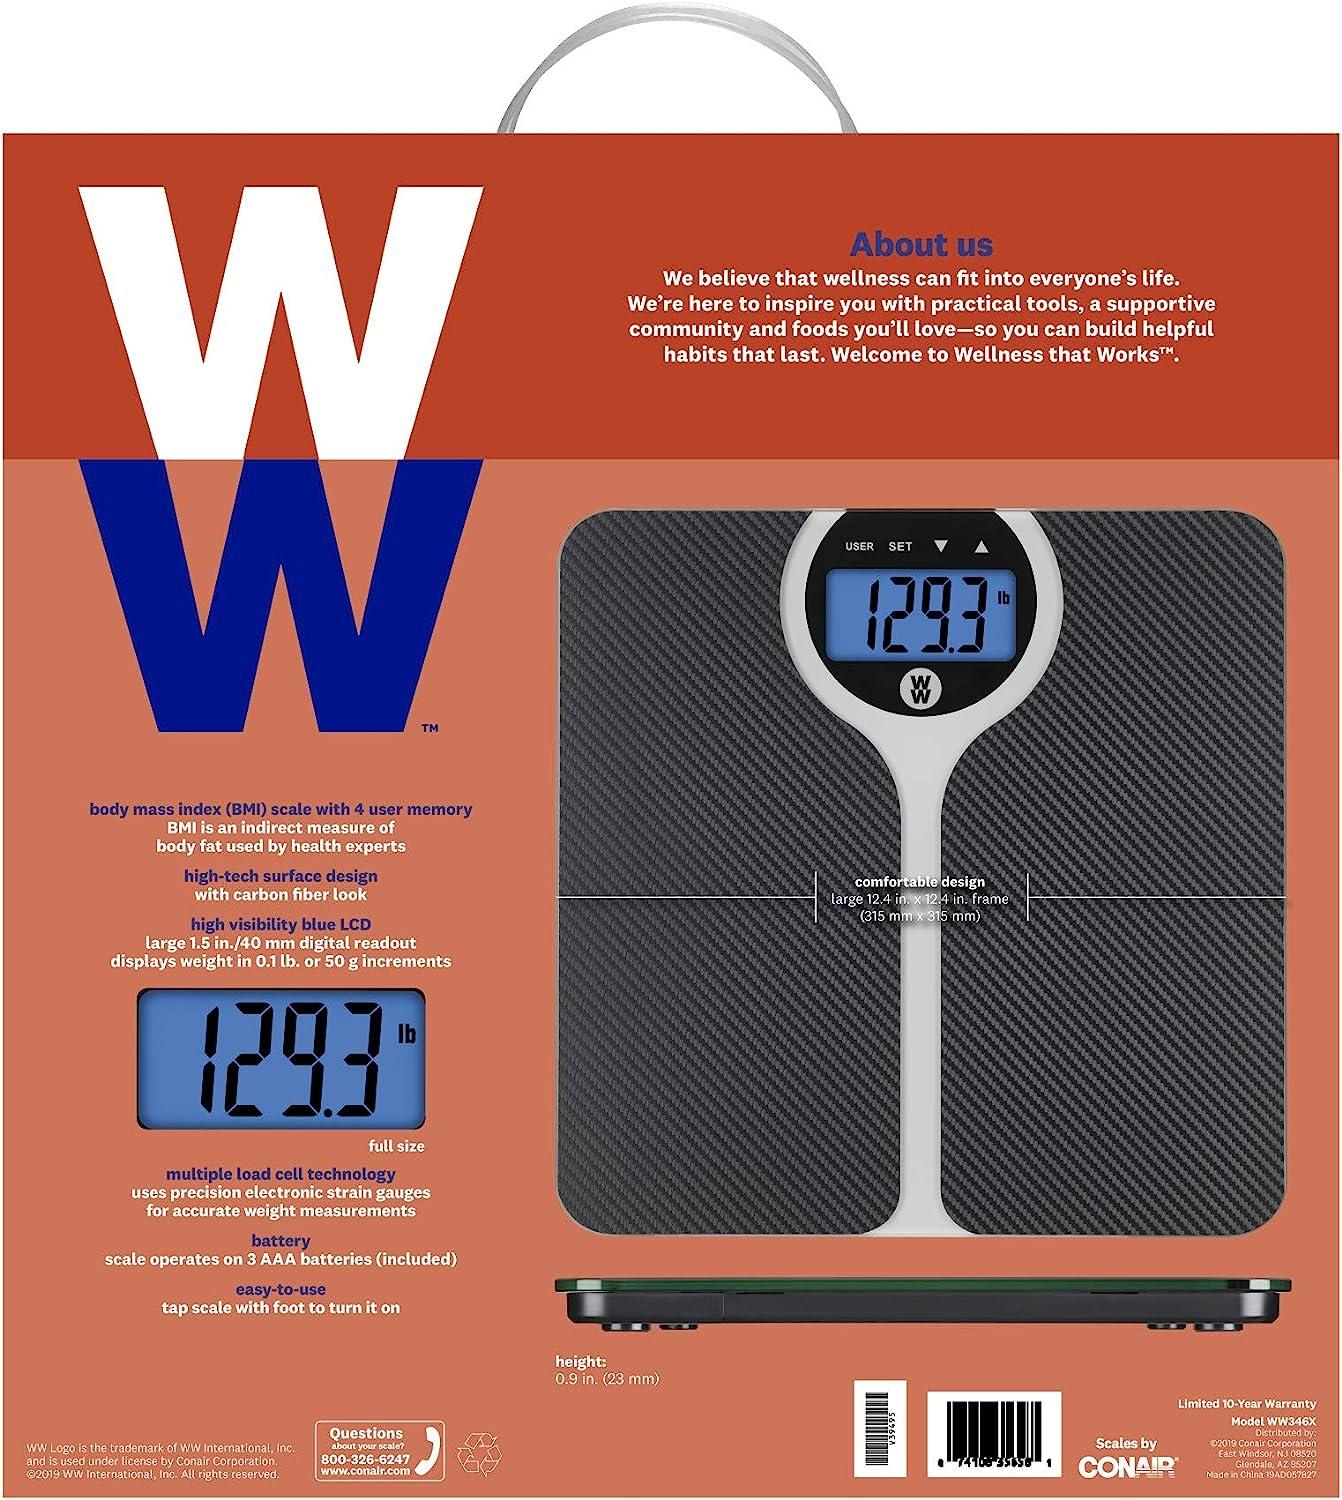 More Scales in the Weight Watchers Range — WW Scales by Conair